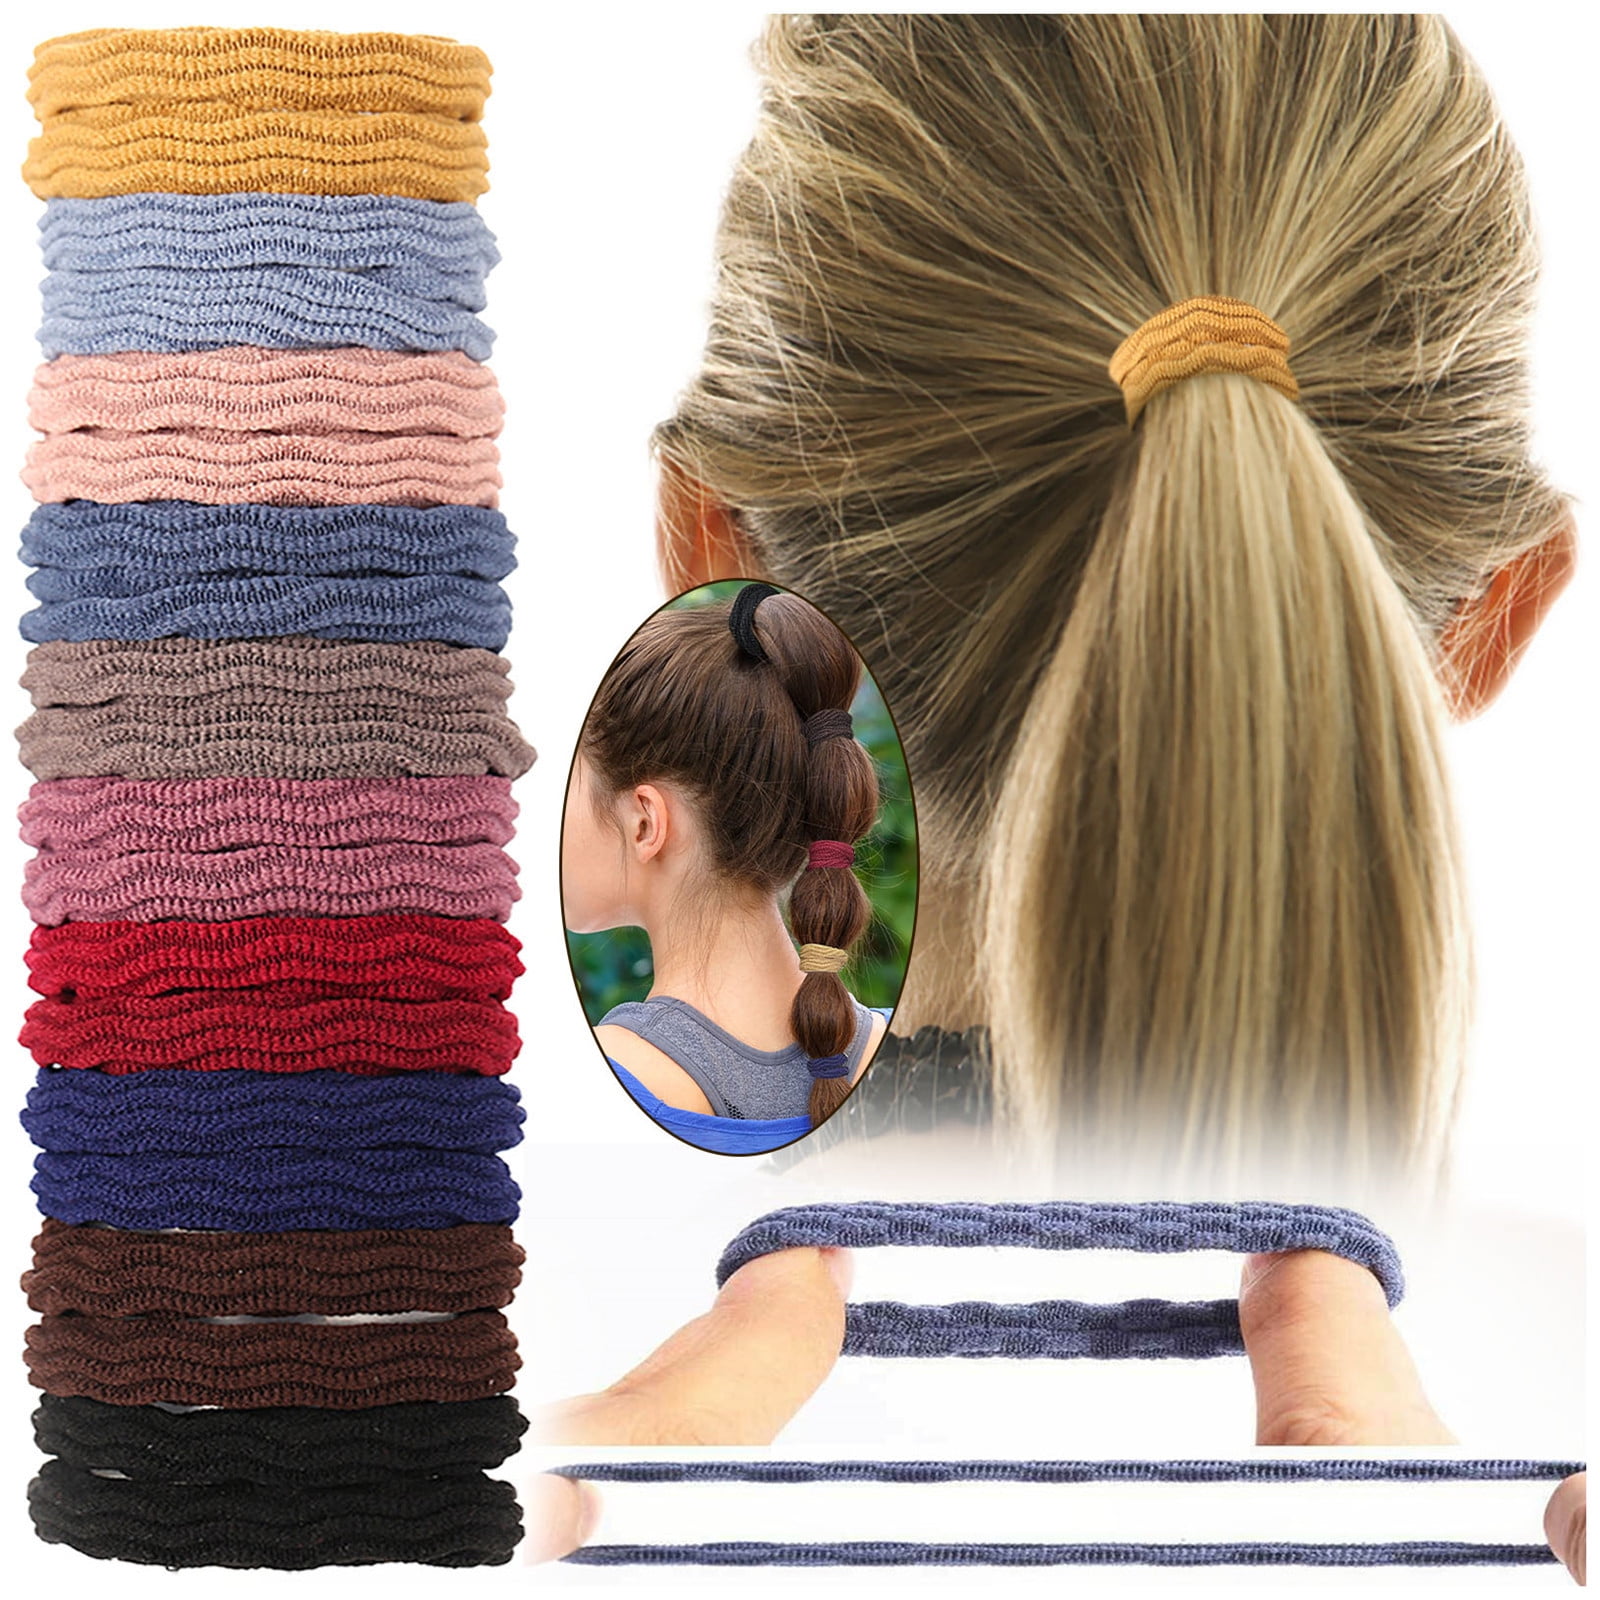 HSMQHJWE Clear Elastics Be Can And Reused Do Suitable Hair Band Women 100  Hair For Girls Rubber Soft Elastic Not Damage Rings Sleeping Bonnet for  Curly Hair Ties 